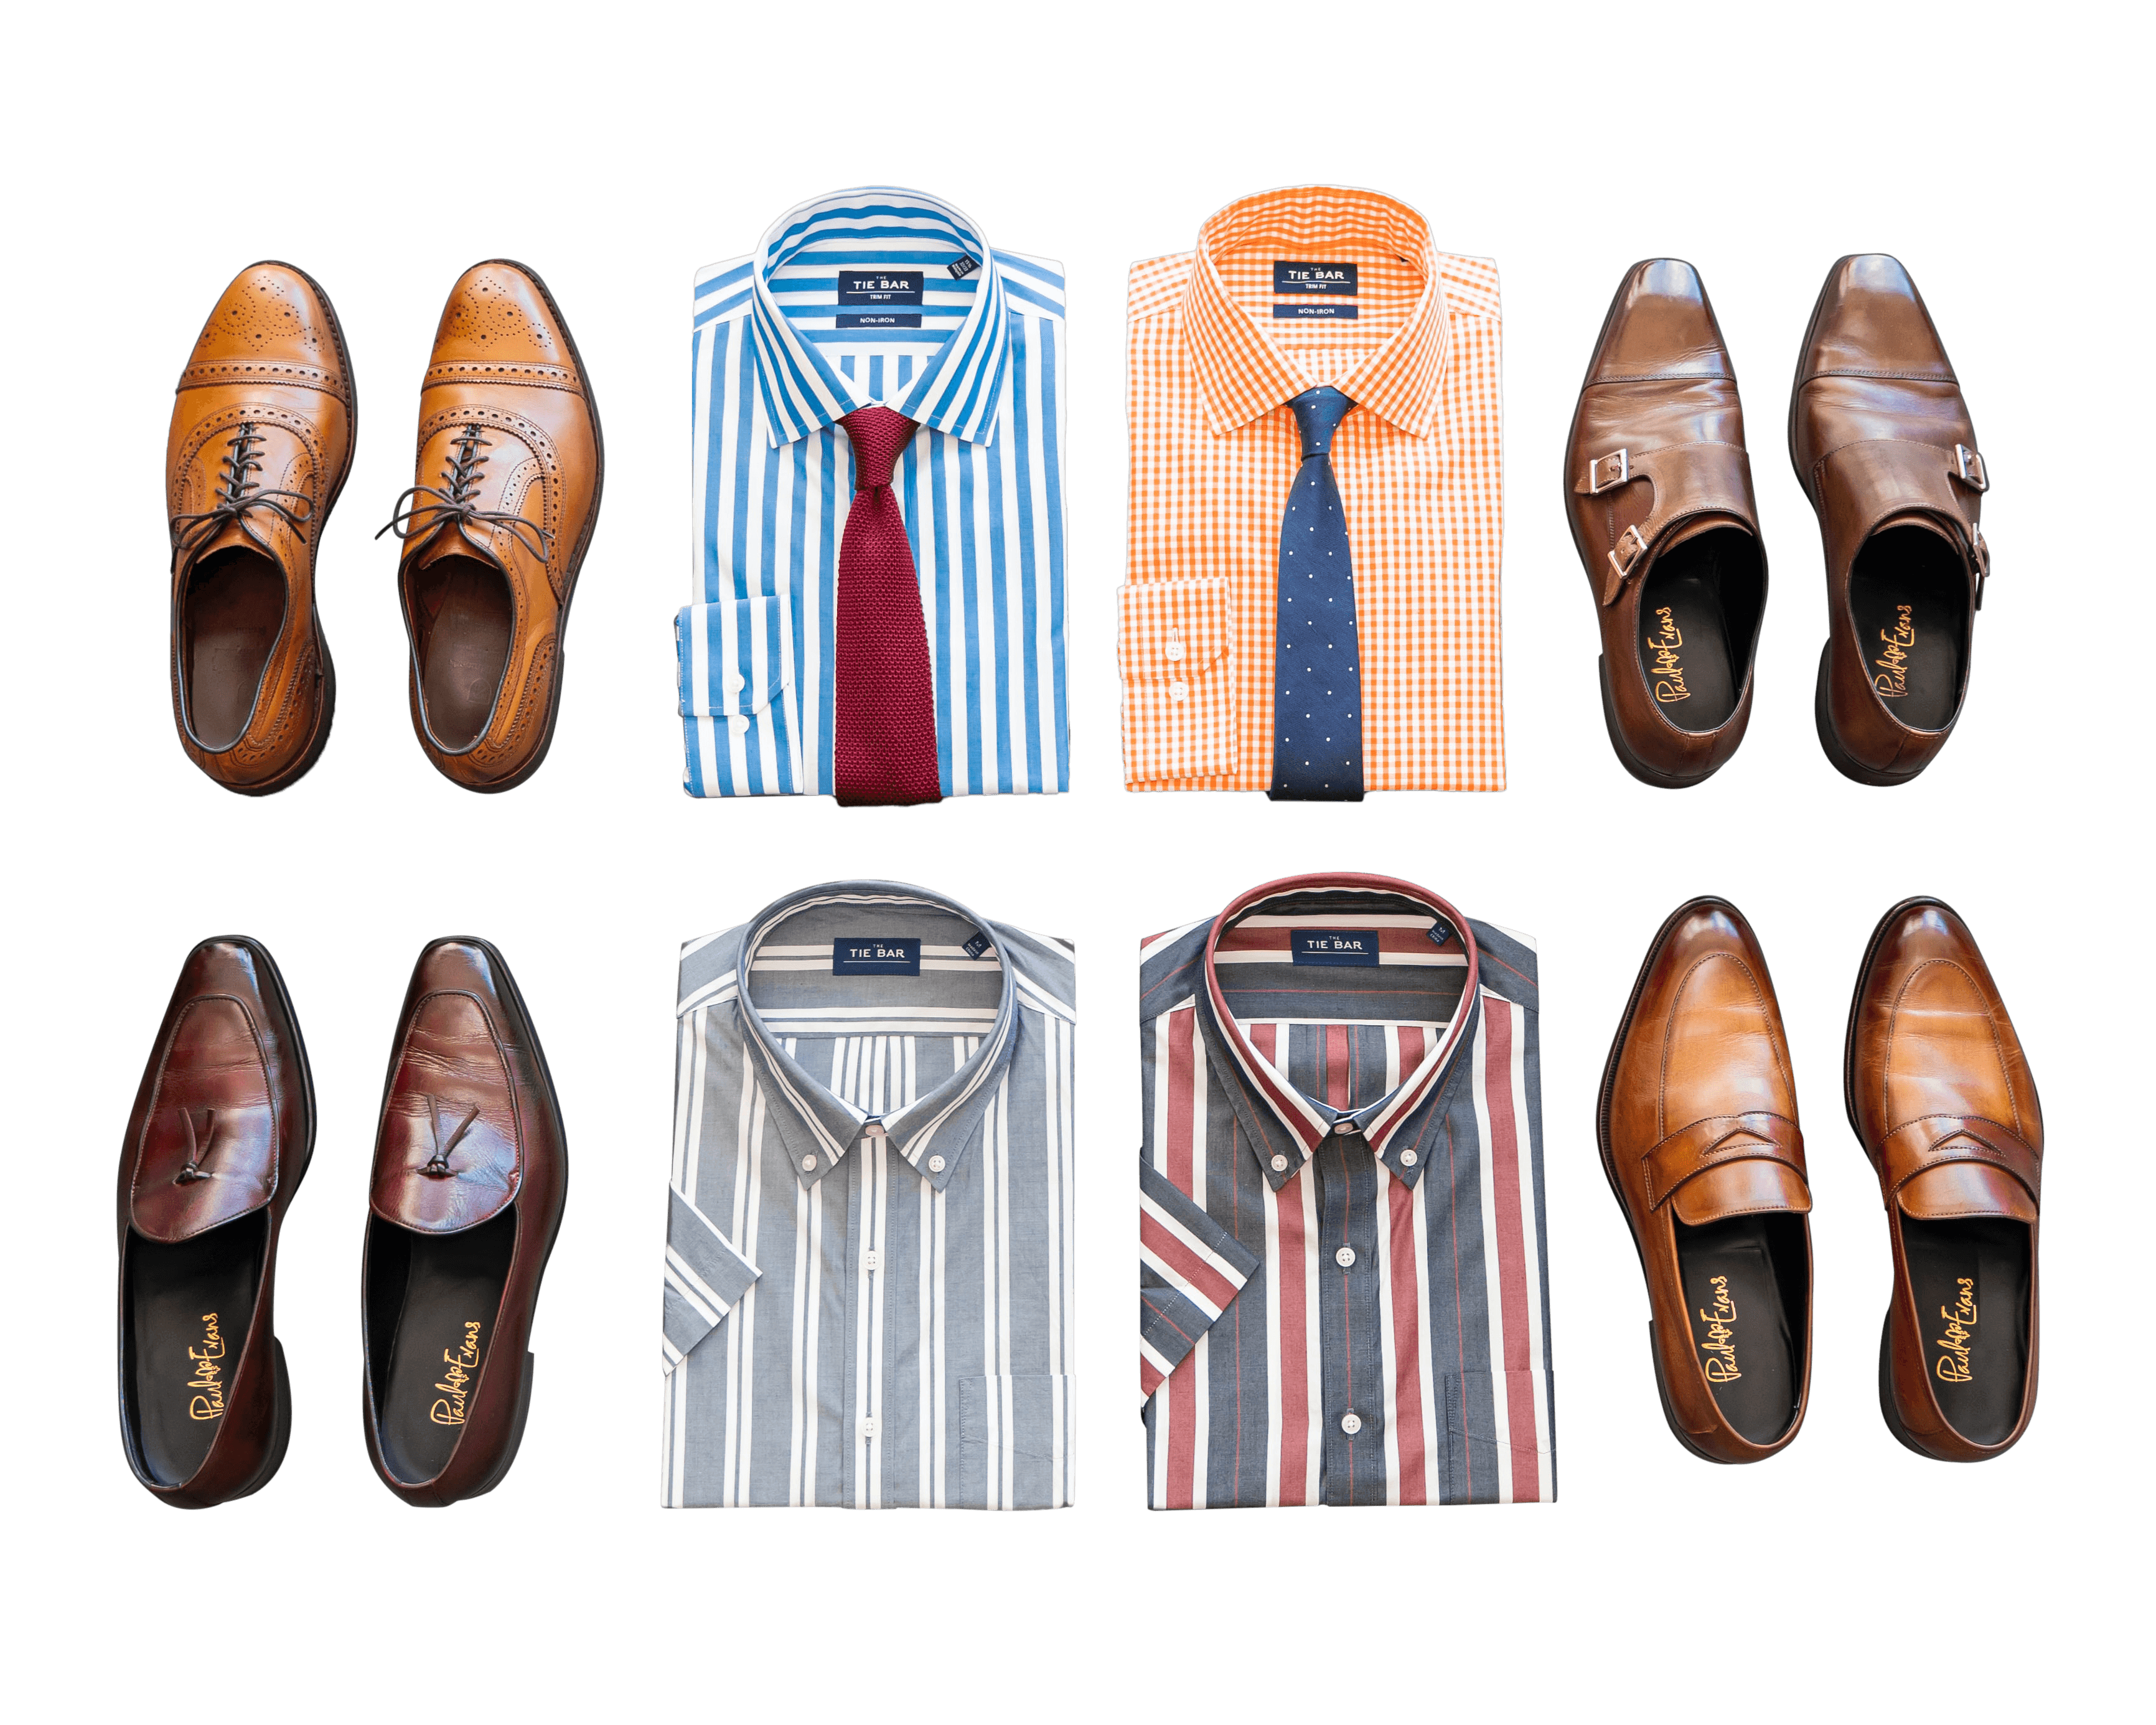 How to style your clothing - DoMyShoot blog